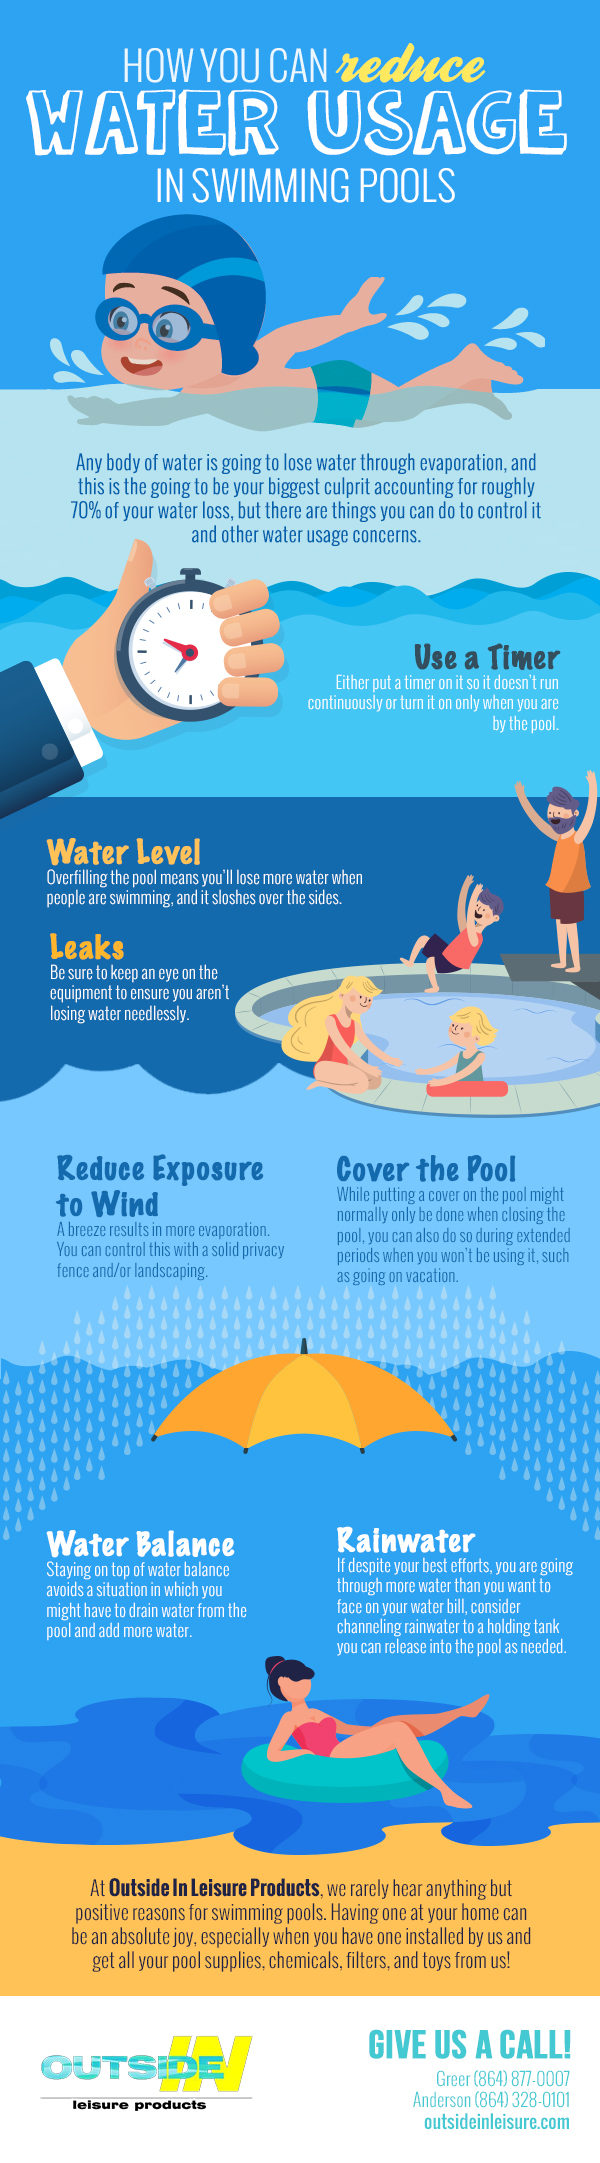 How to reduce water usage in swimming pools